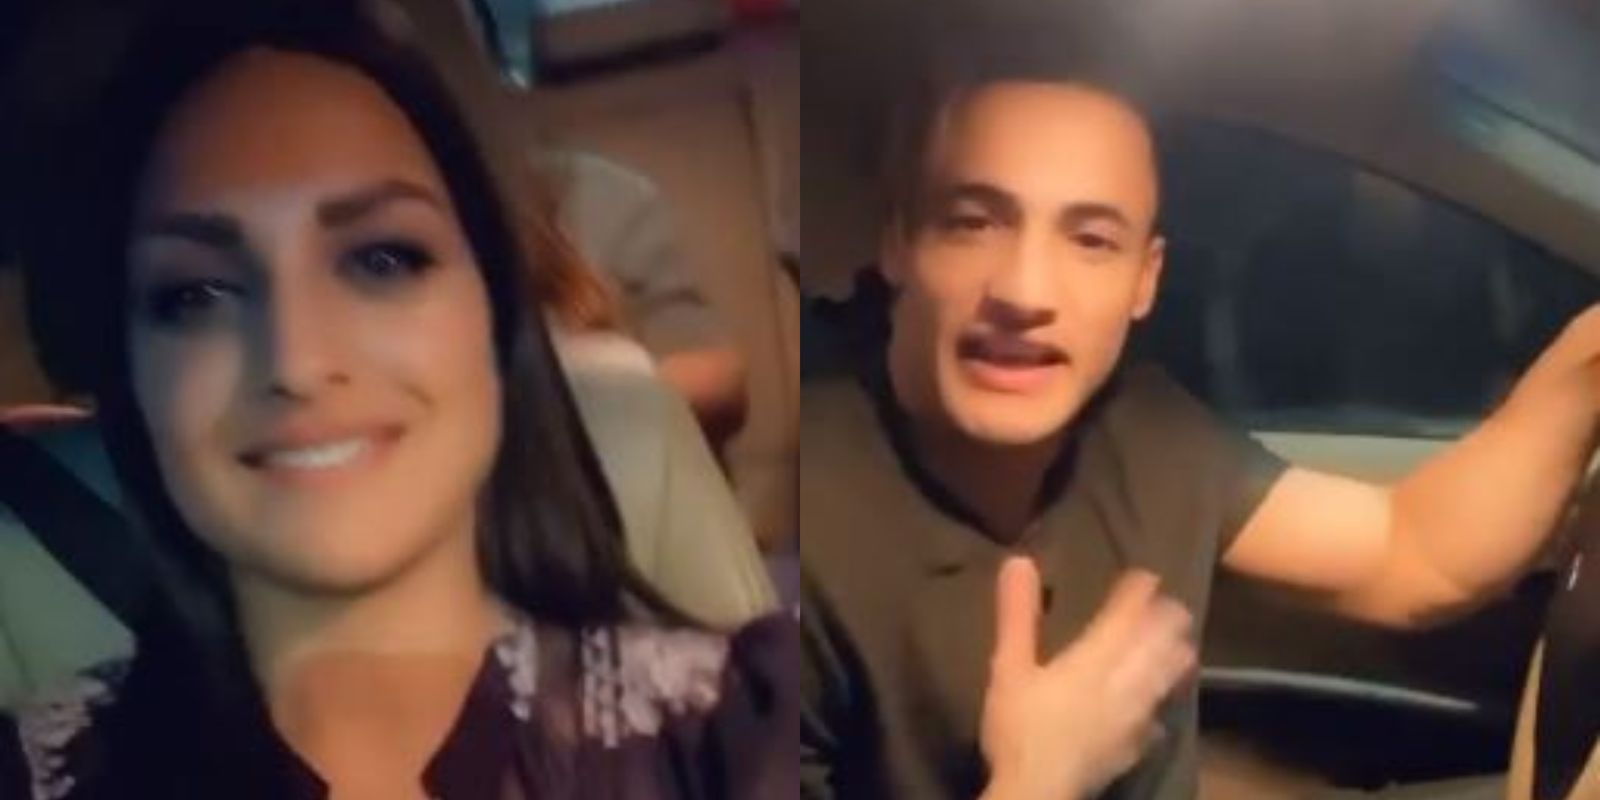 Bigg Boss 13 Couple Asim Riaz And Himanshi Khurrana Enjoy A Late Night Drive In Chandigarh Together; Watch Videos